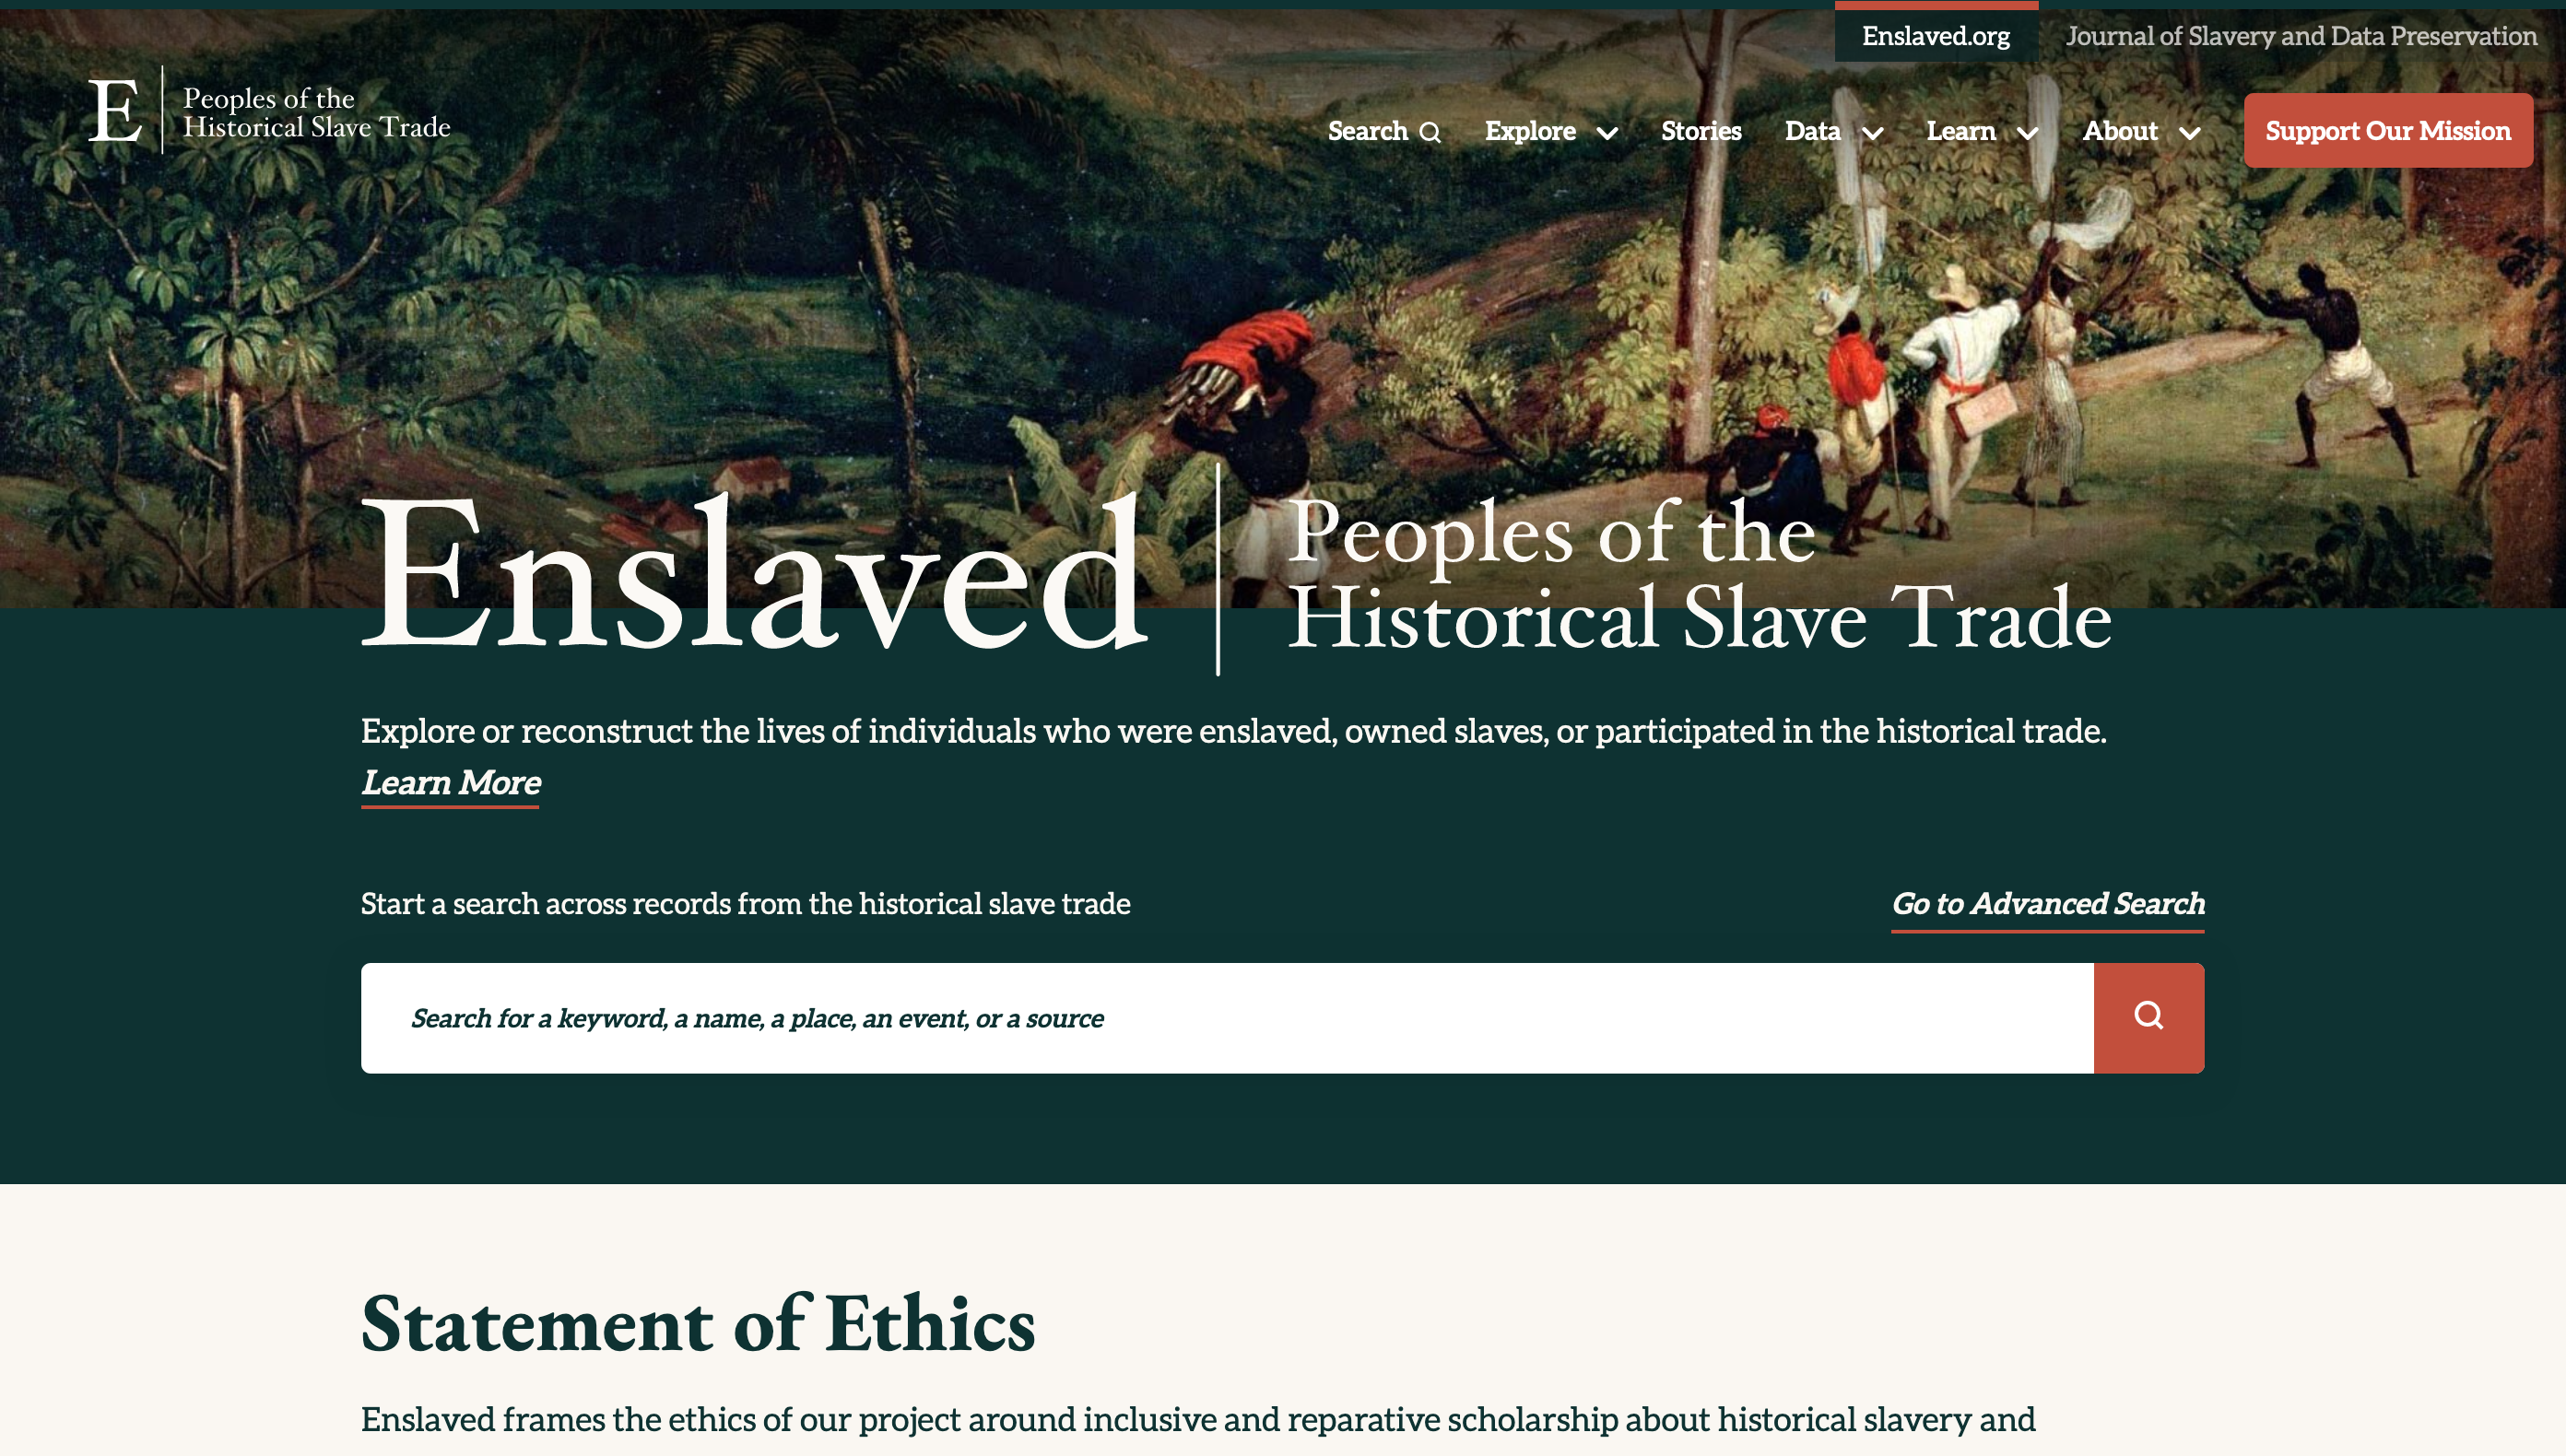 Enslaved: Peoples of the Historical Slave Trade